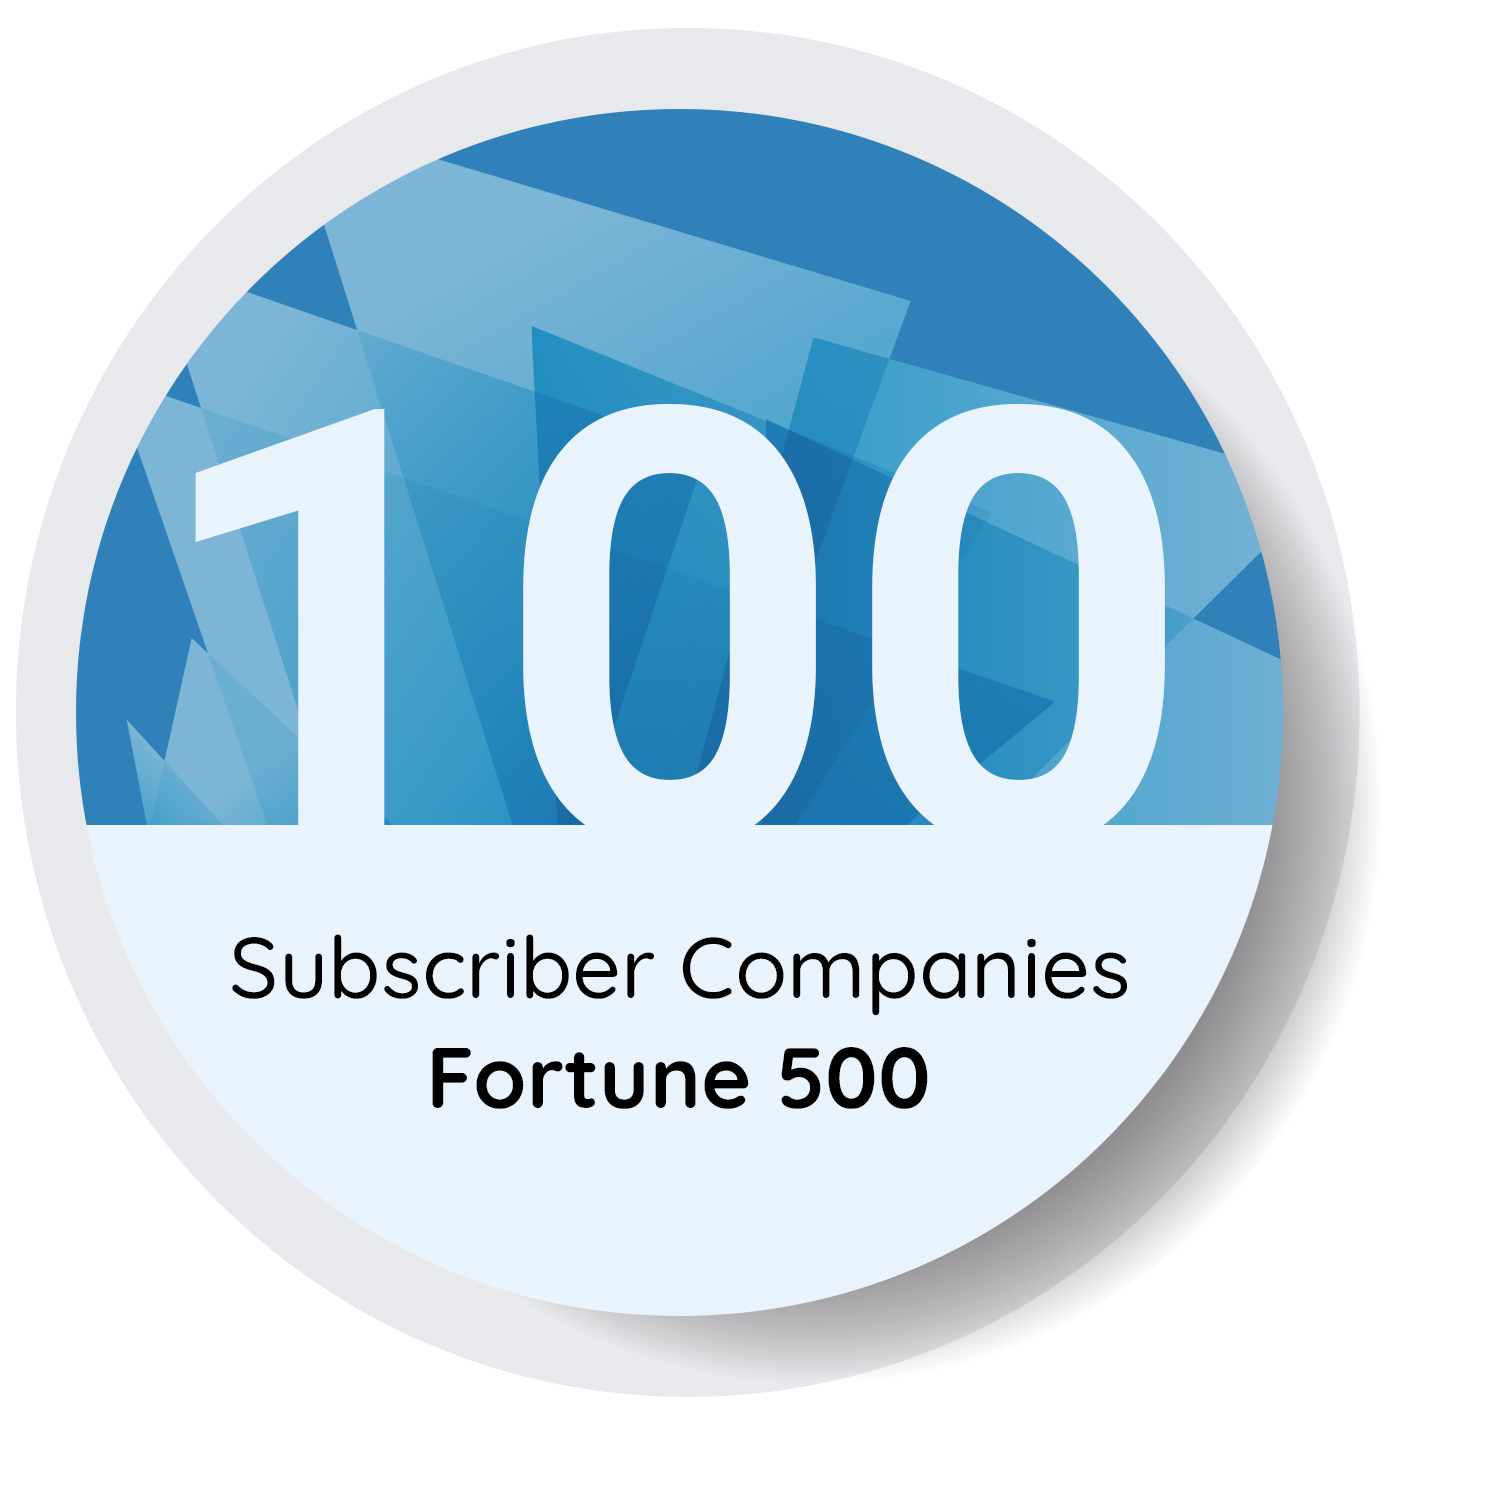 # Subscriber Companies in the Fortune 500